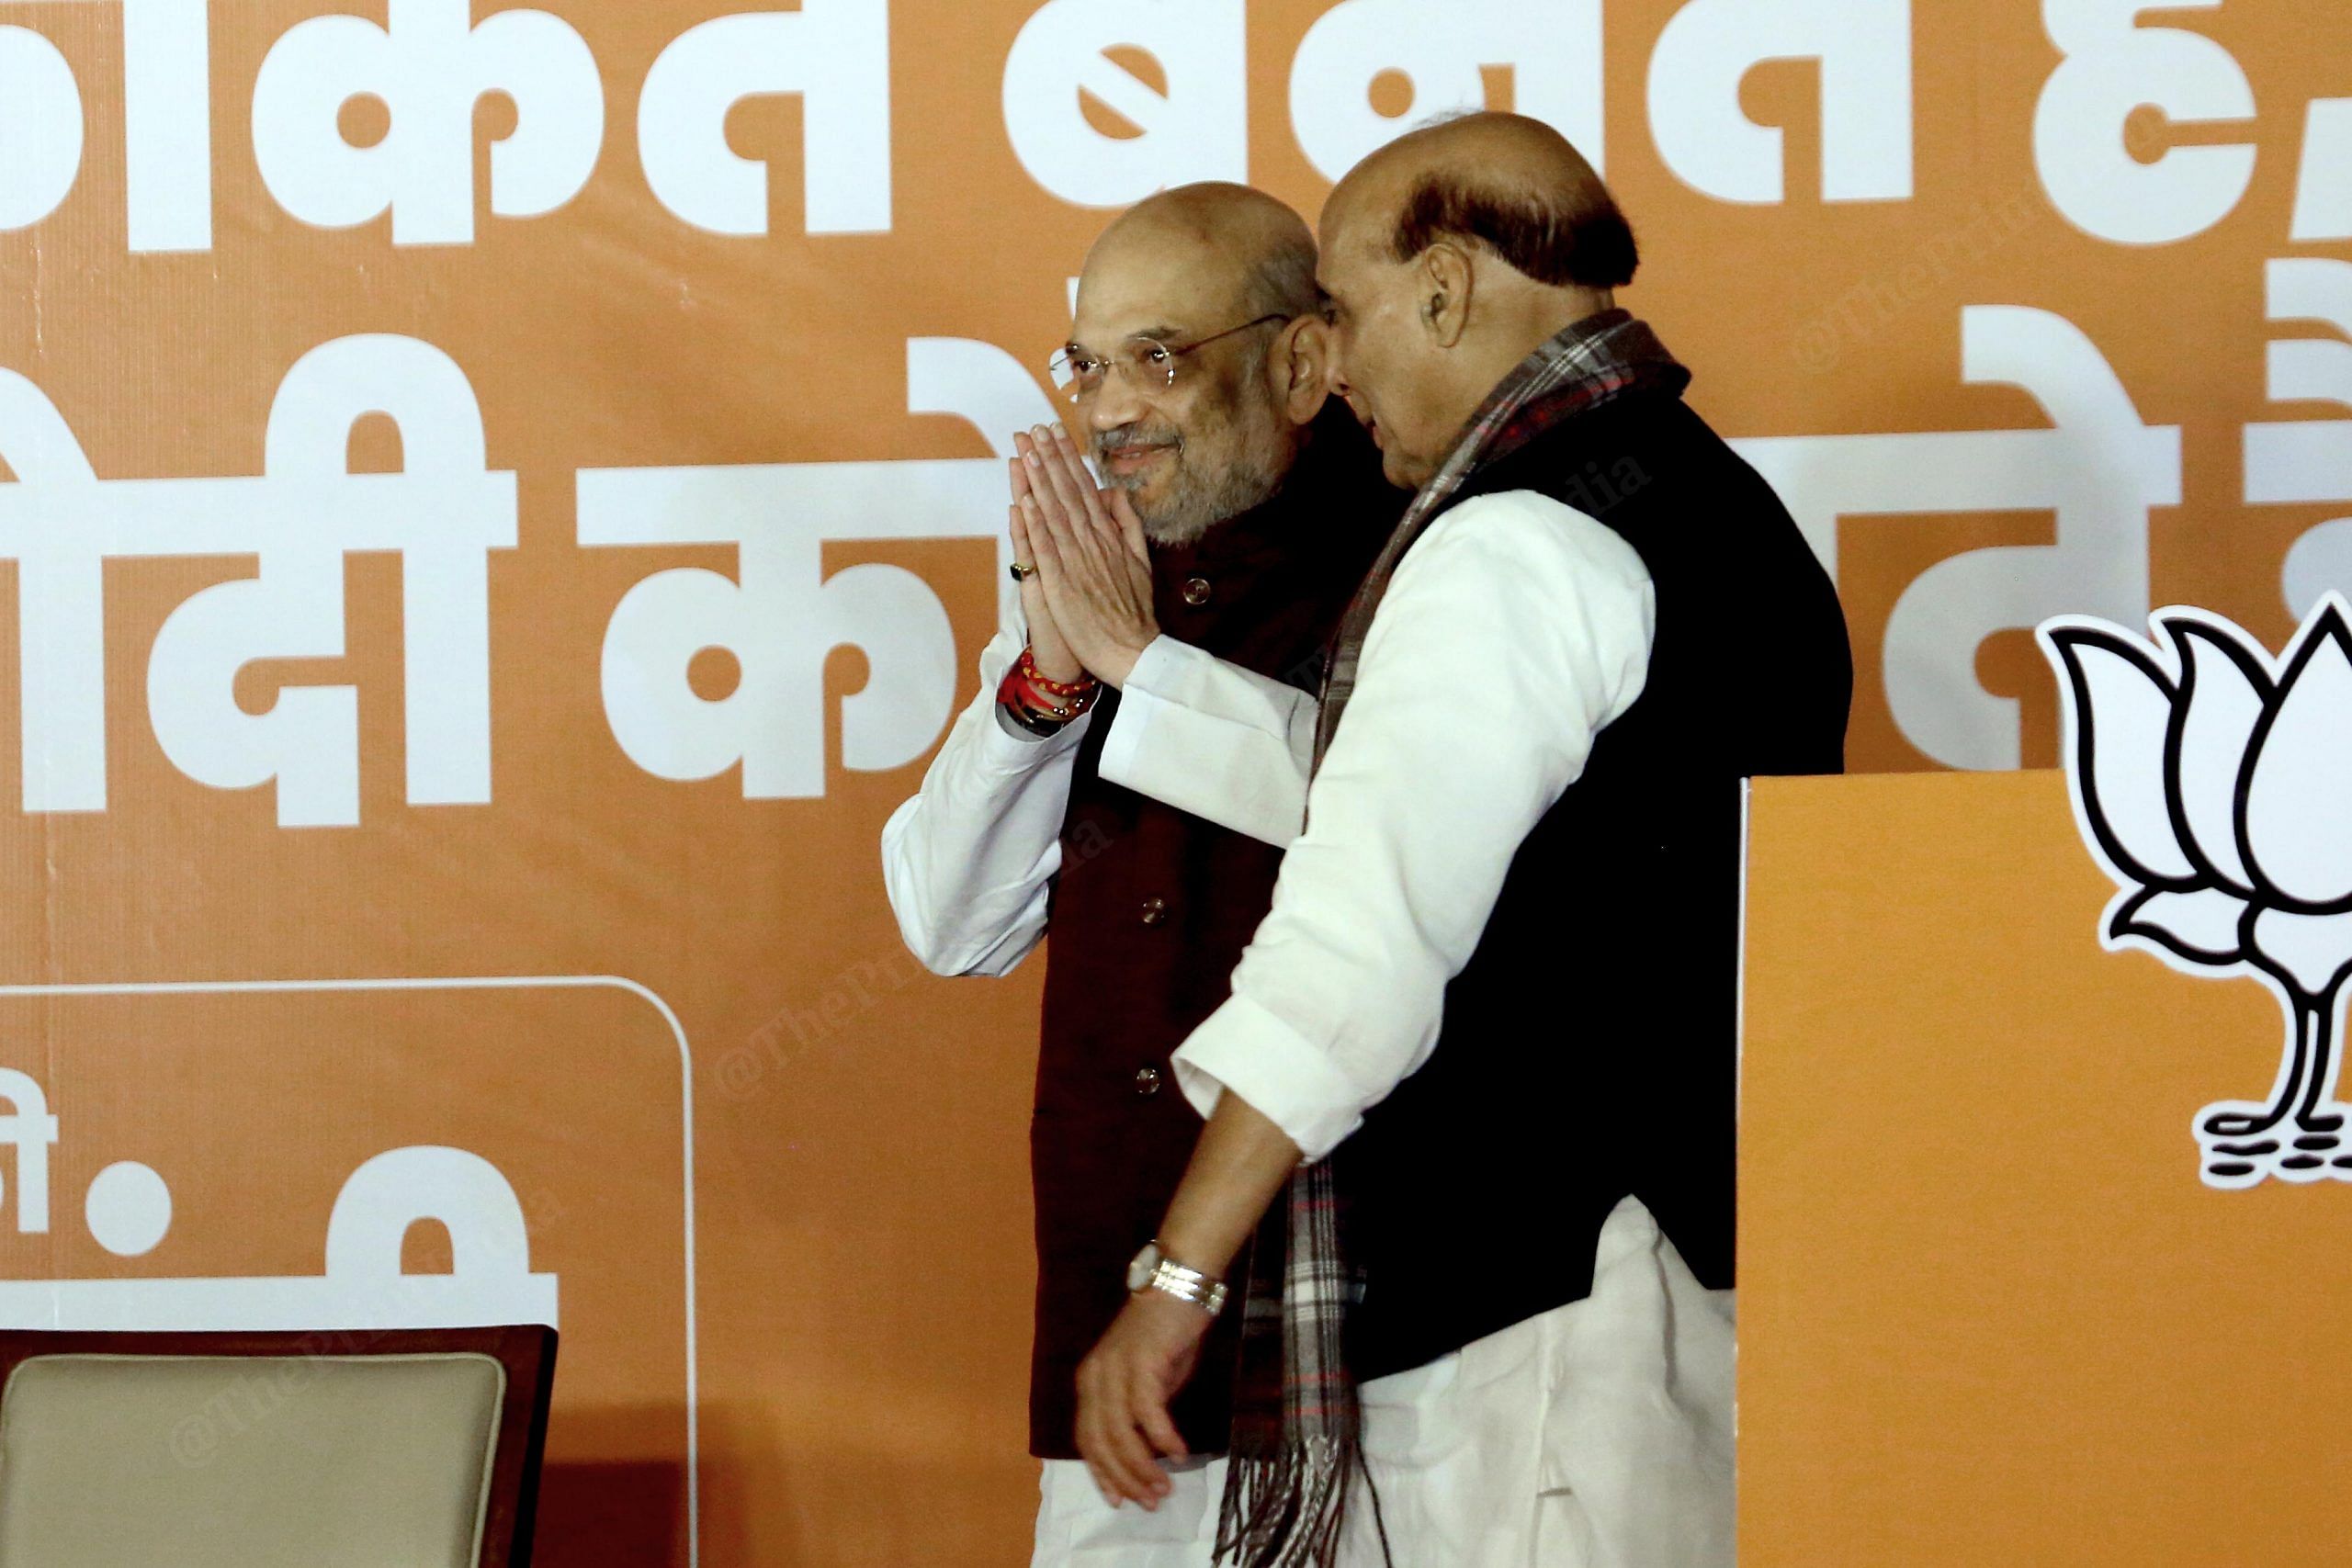 Defence Minister Rajnath Singh and Union Home Minister Amit Shah during celebrations after party's victory in elections to the Legislative Assemblies of Madhya Pradesh, Rajasthan and Chhattisgarh, at BJP headquarters | Praveen Jain | ThePrint